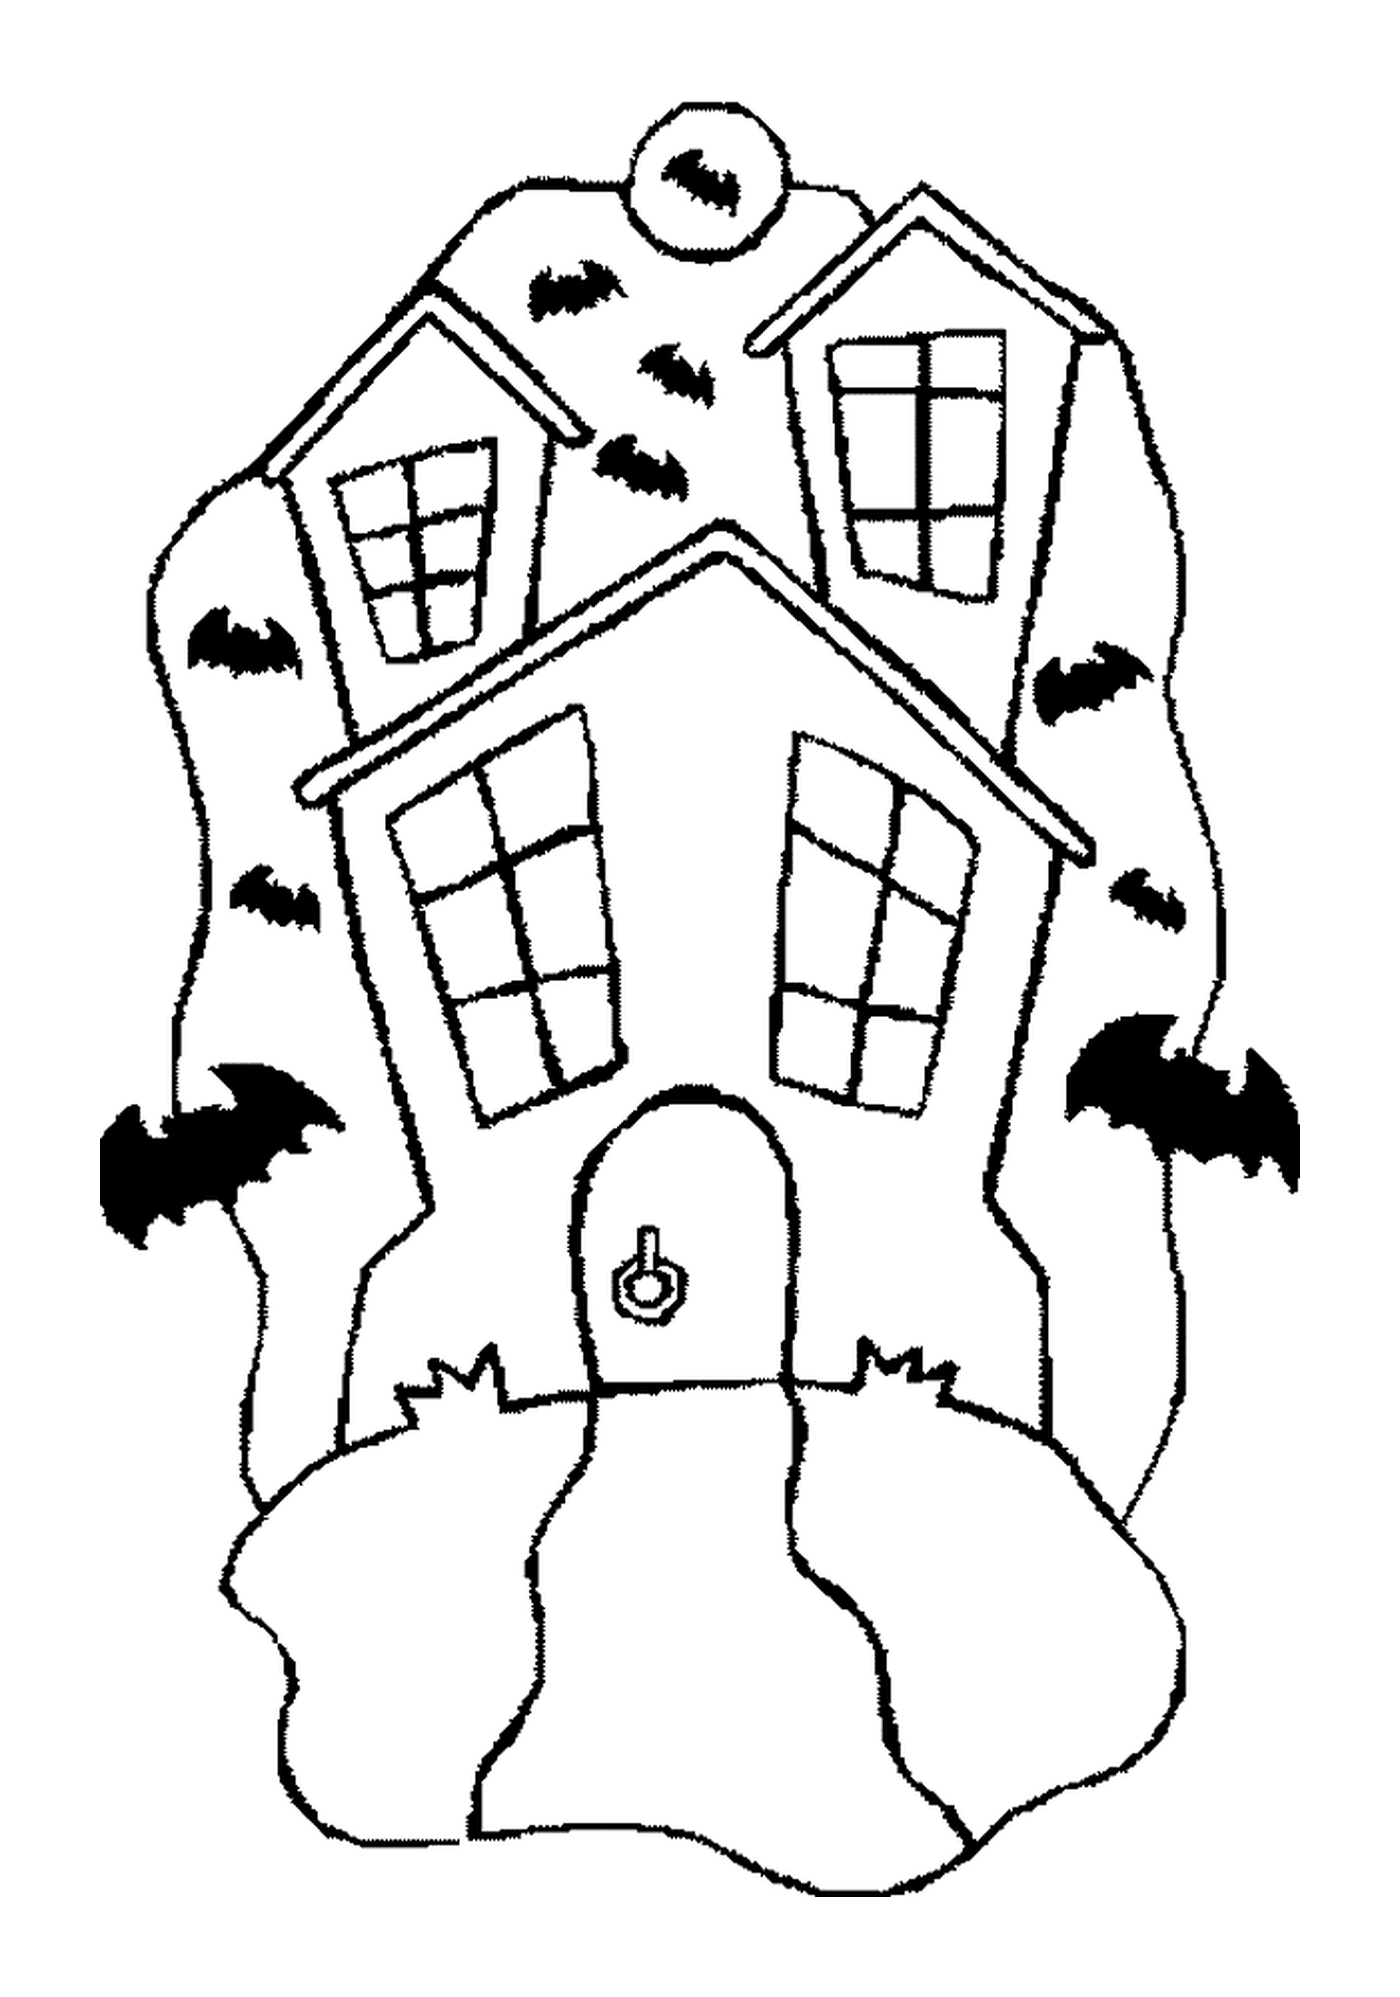  A house haunted with bats 